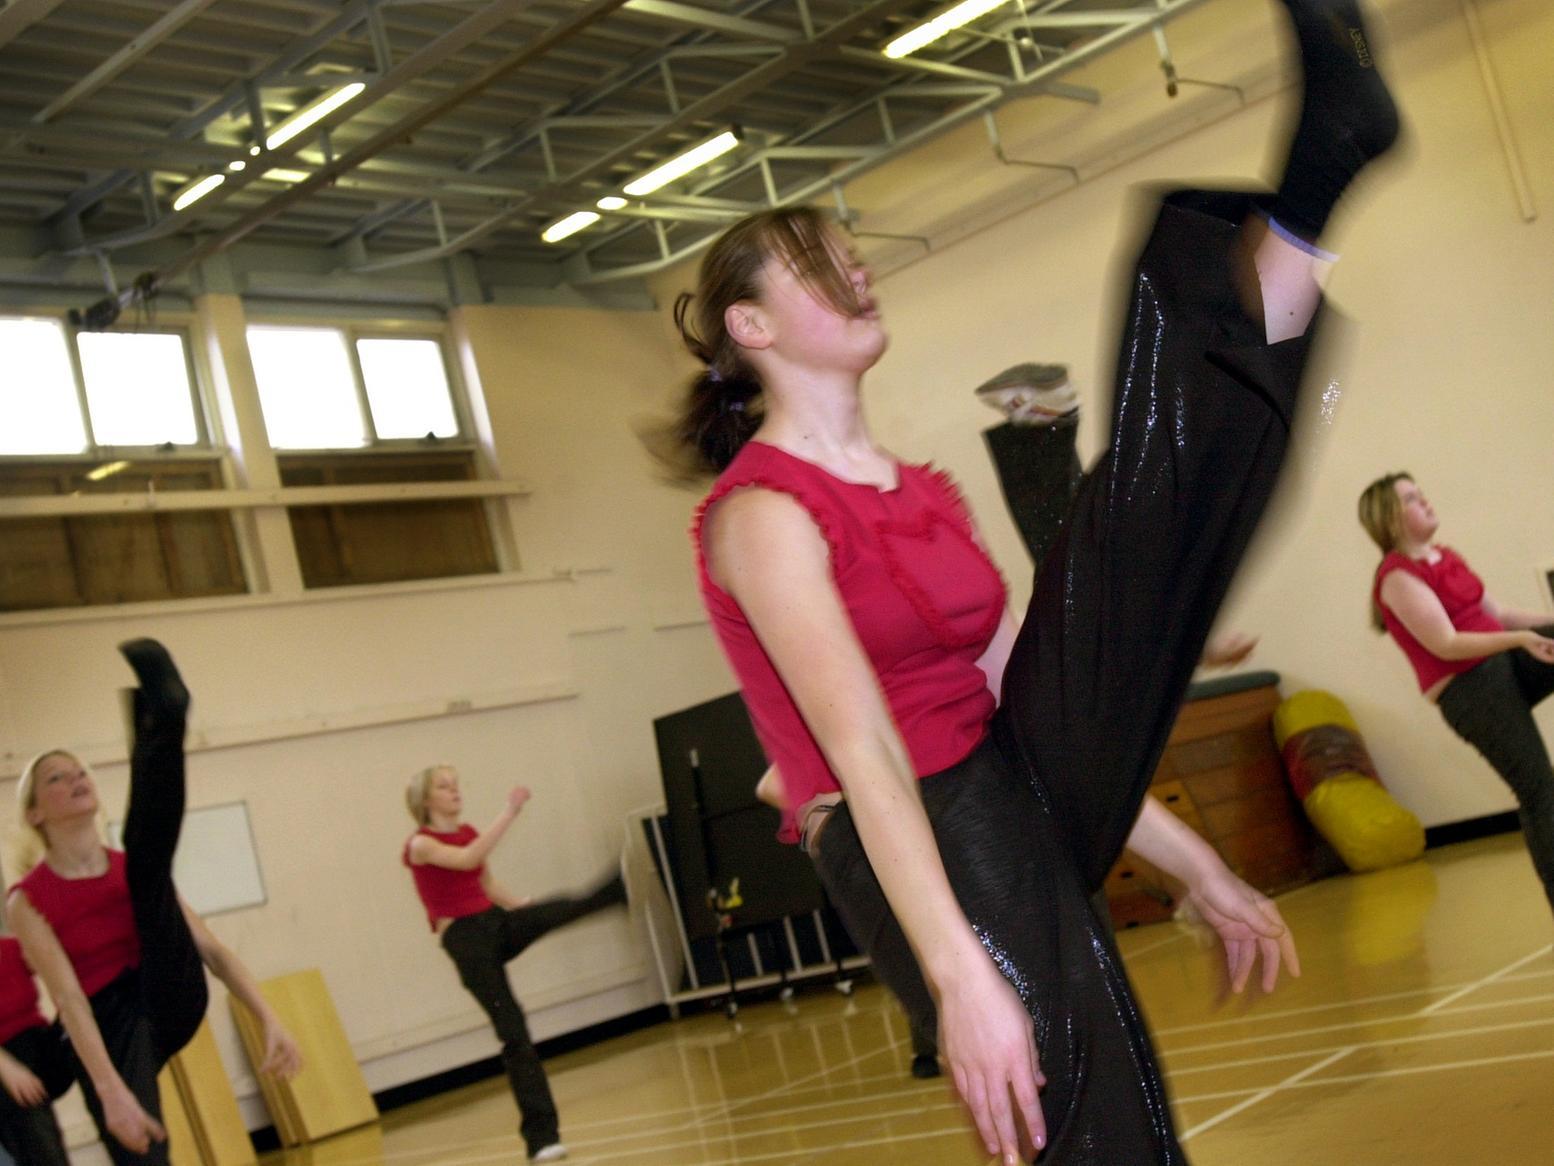 Pupils from Merlyn Rees High School put the finishing touches to a dance routine ahead of the launch of the new South Leeds Arts College in January 2002.